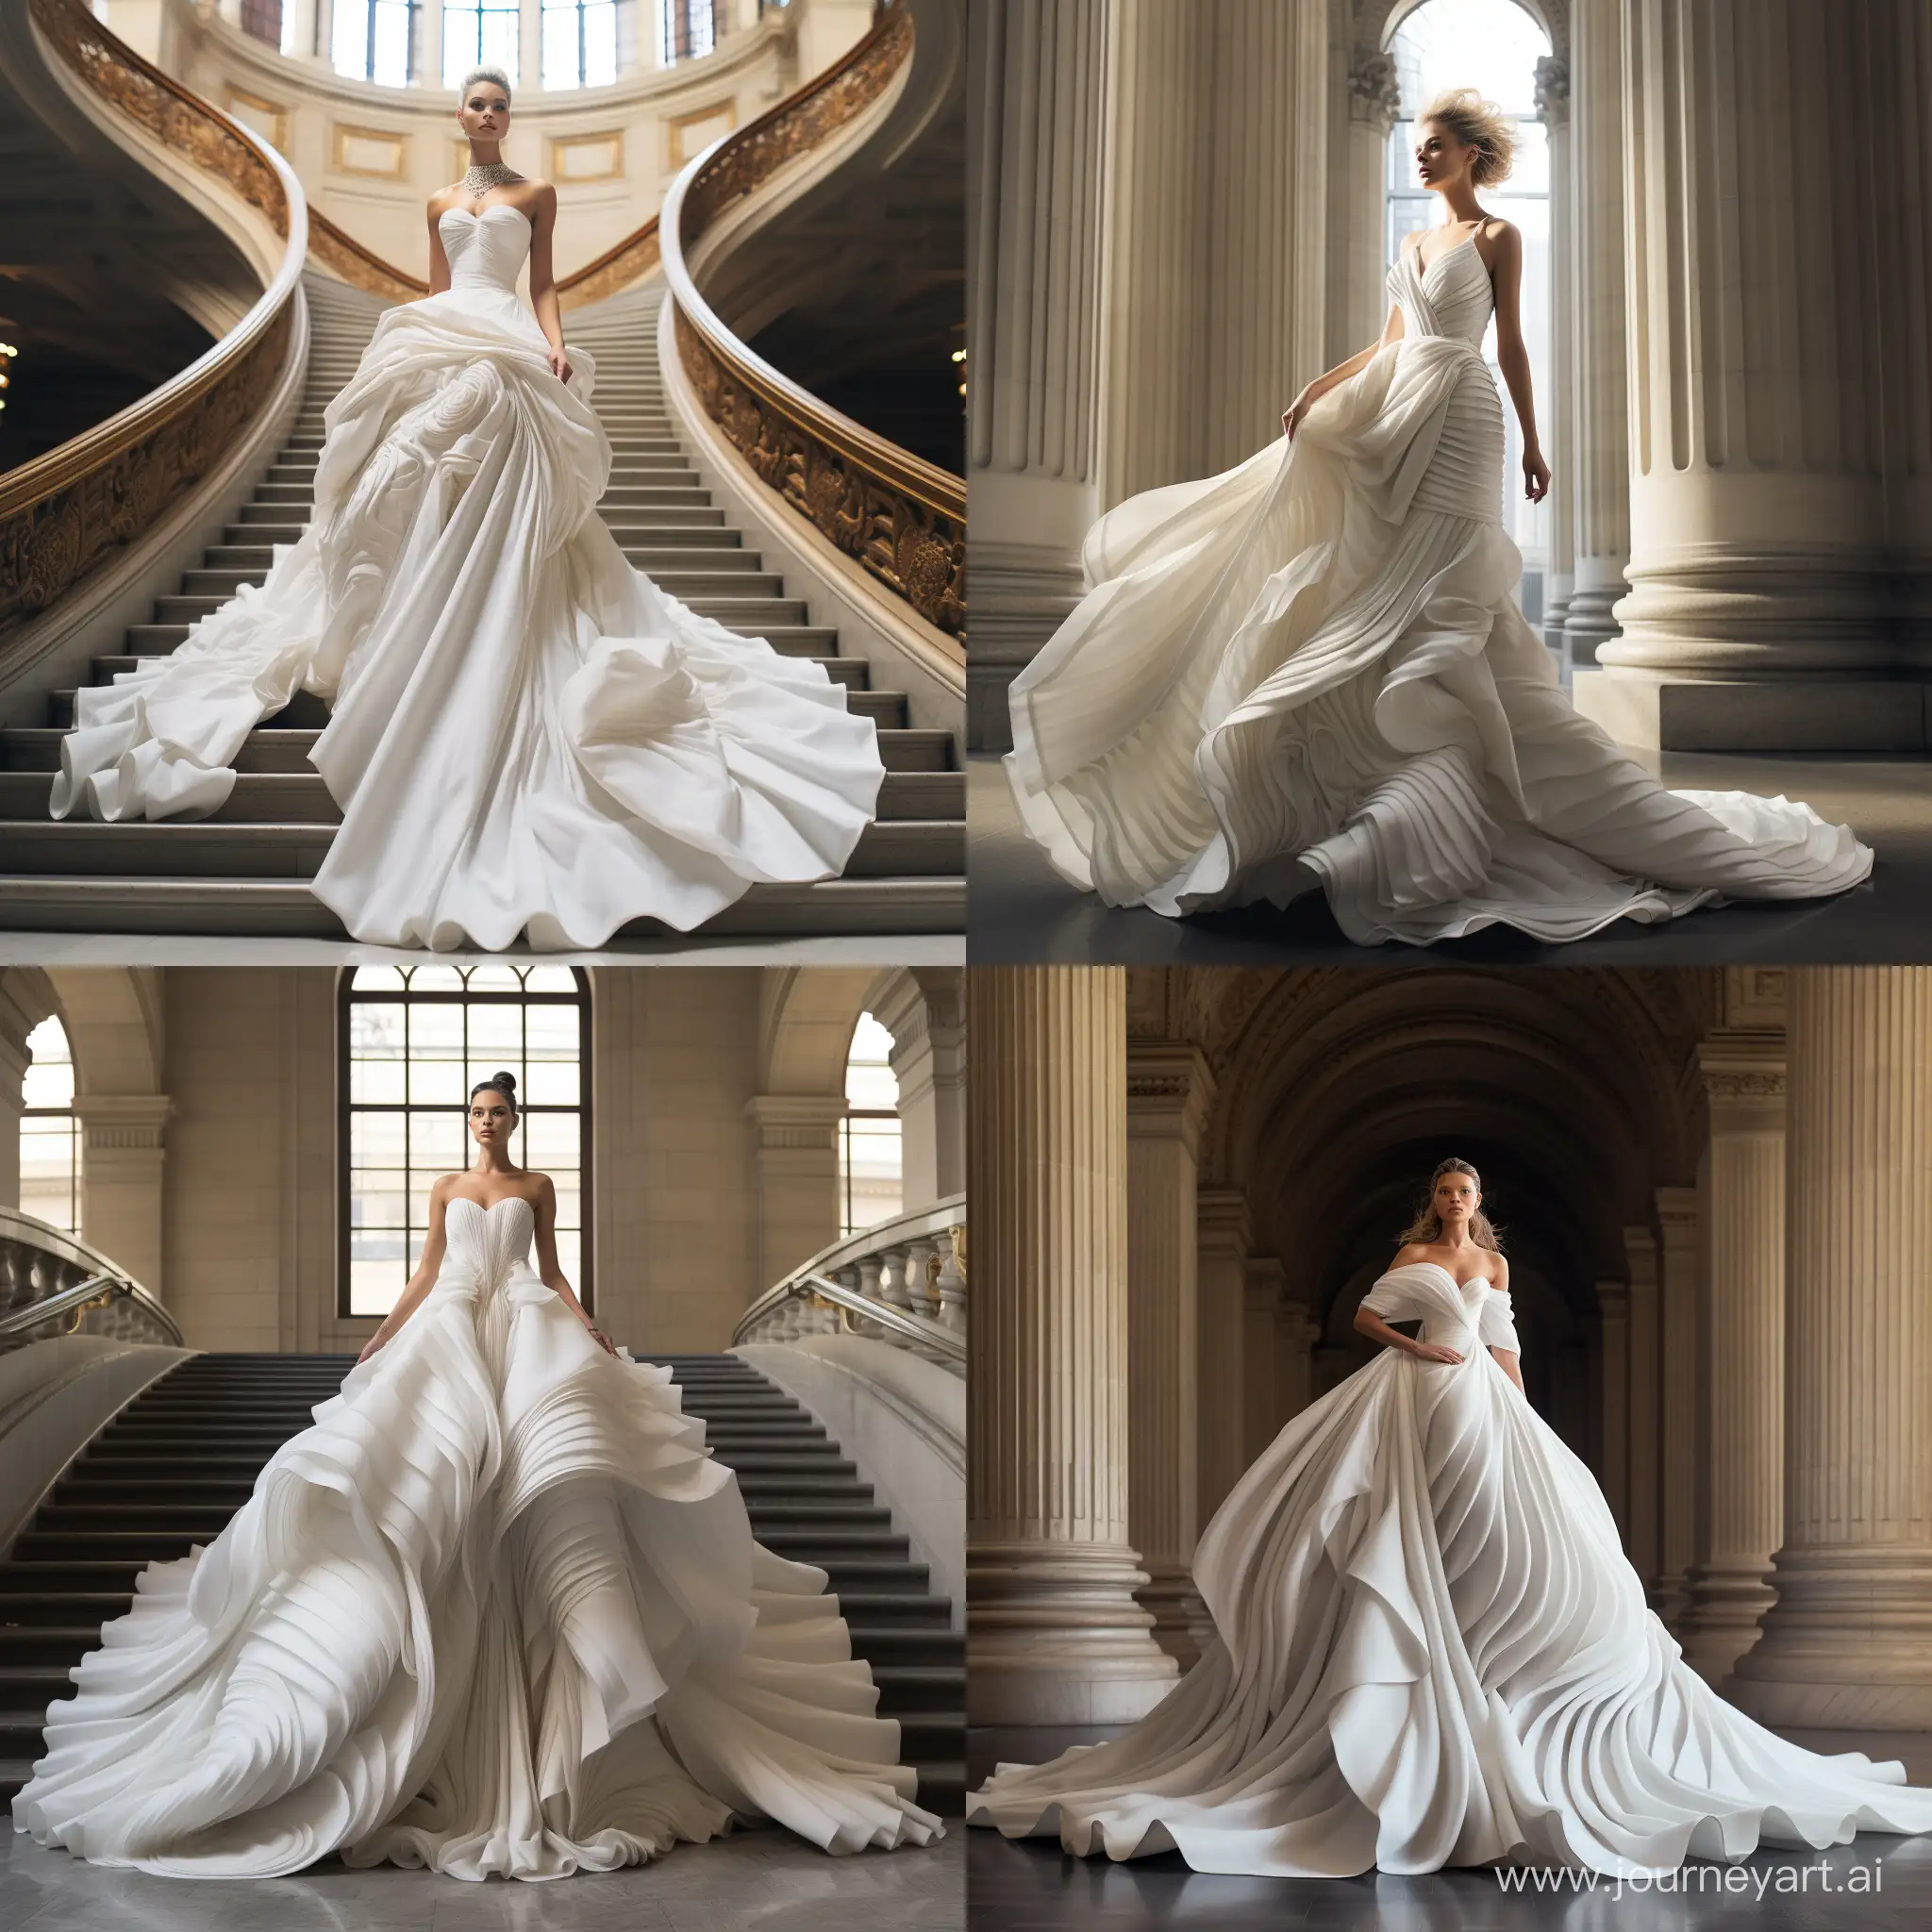 Chic-Wedding-Glamour-Gowns-at-the-Intersection-of-Fashion-and-Architecture